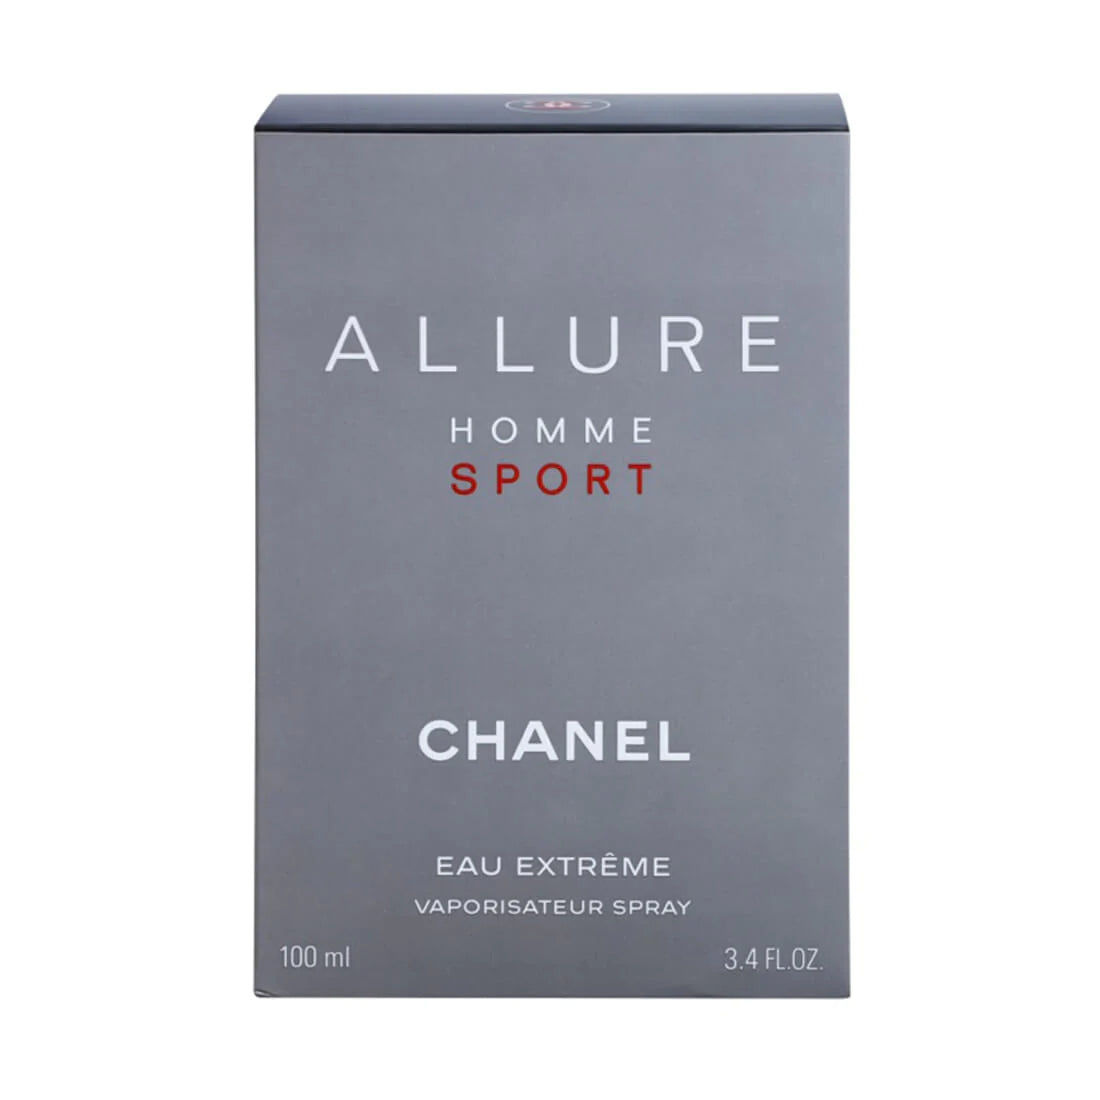 Chanel Allure Homme Sport Eau Extreme – Just Attar